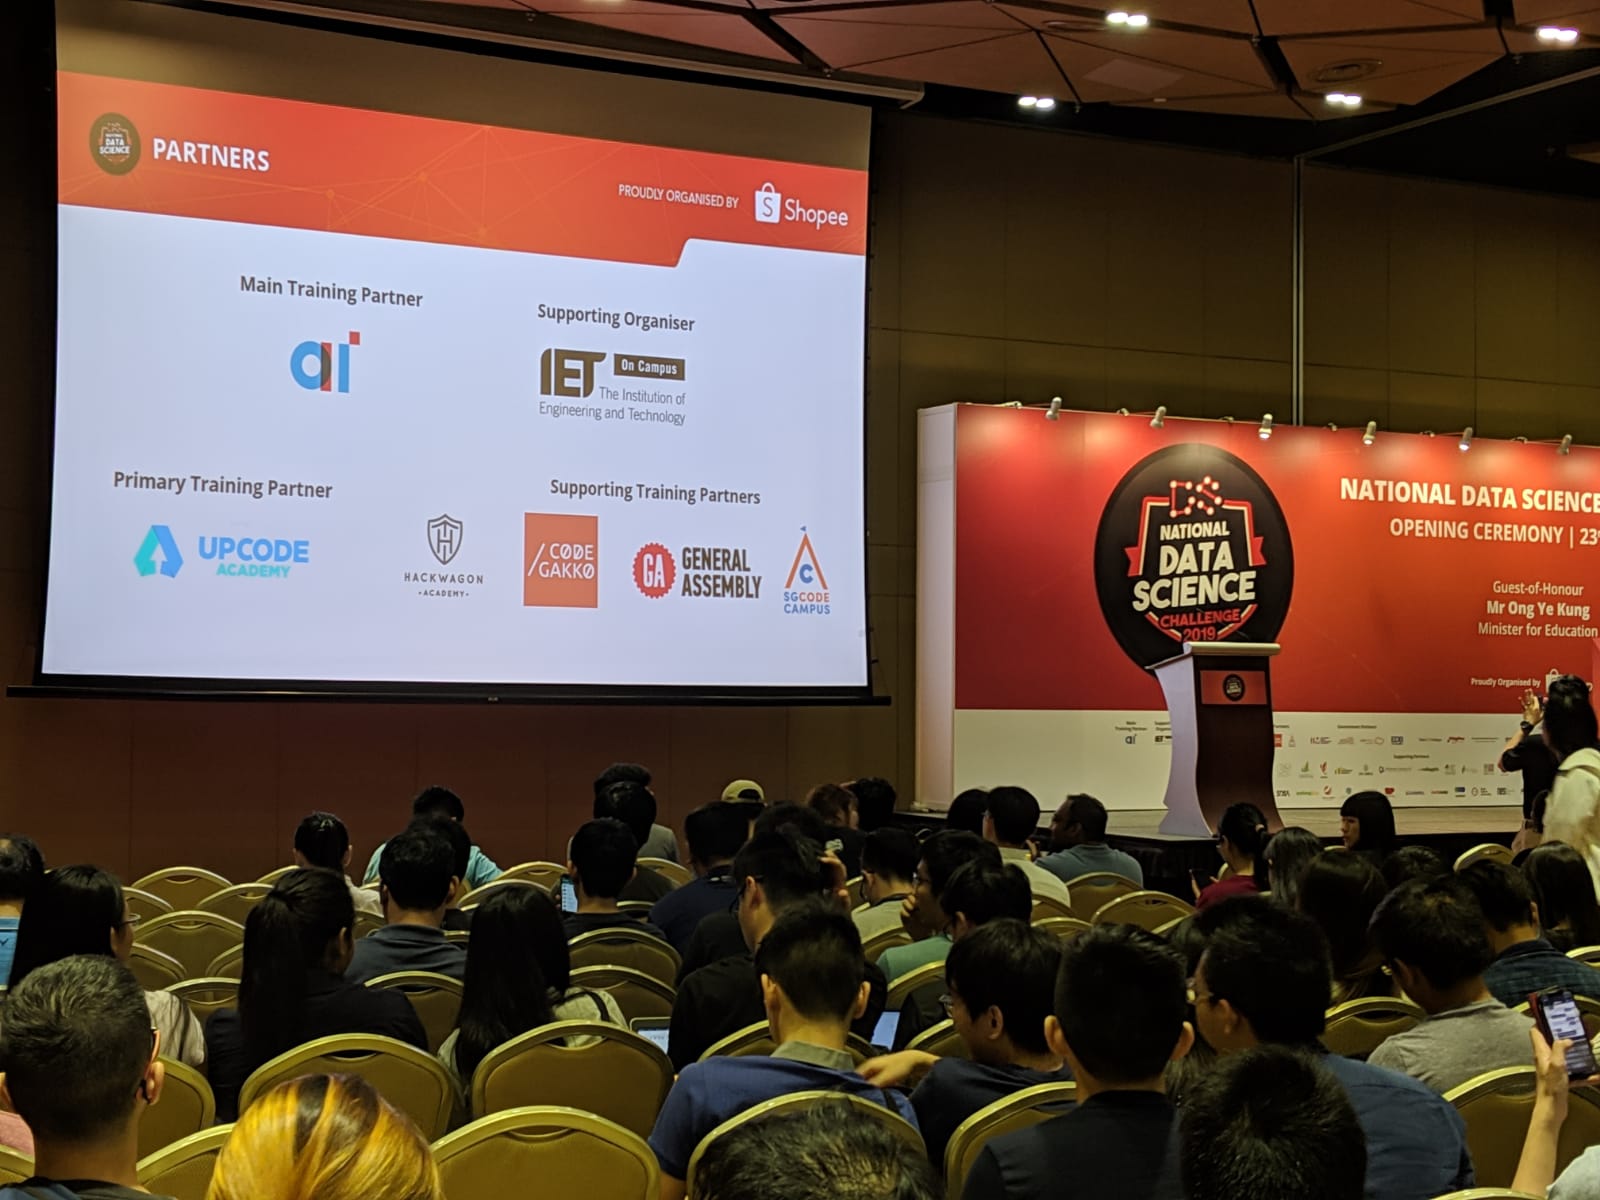 SG Code Campus announced as an Official Supporting Training Partner for Shopee's National Data Science Challenge